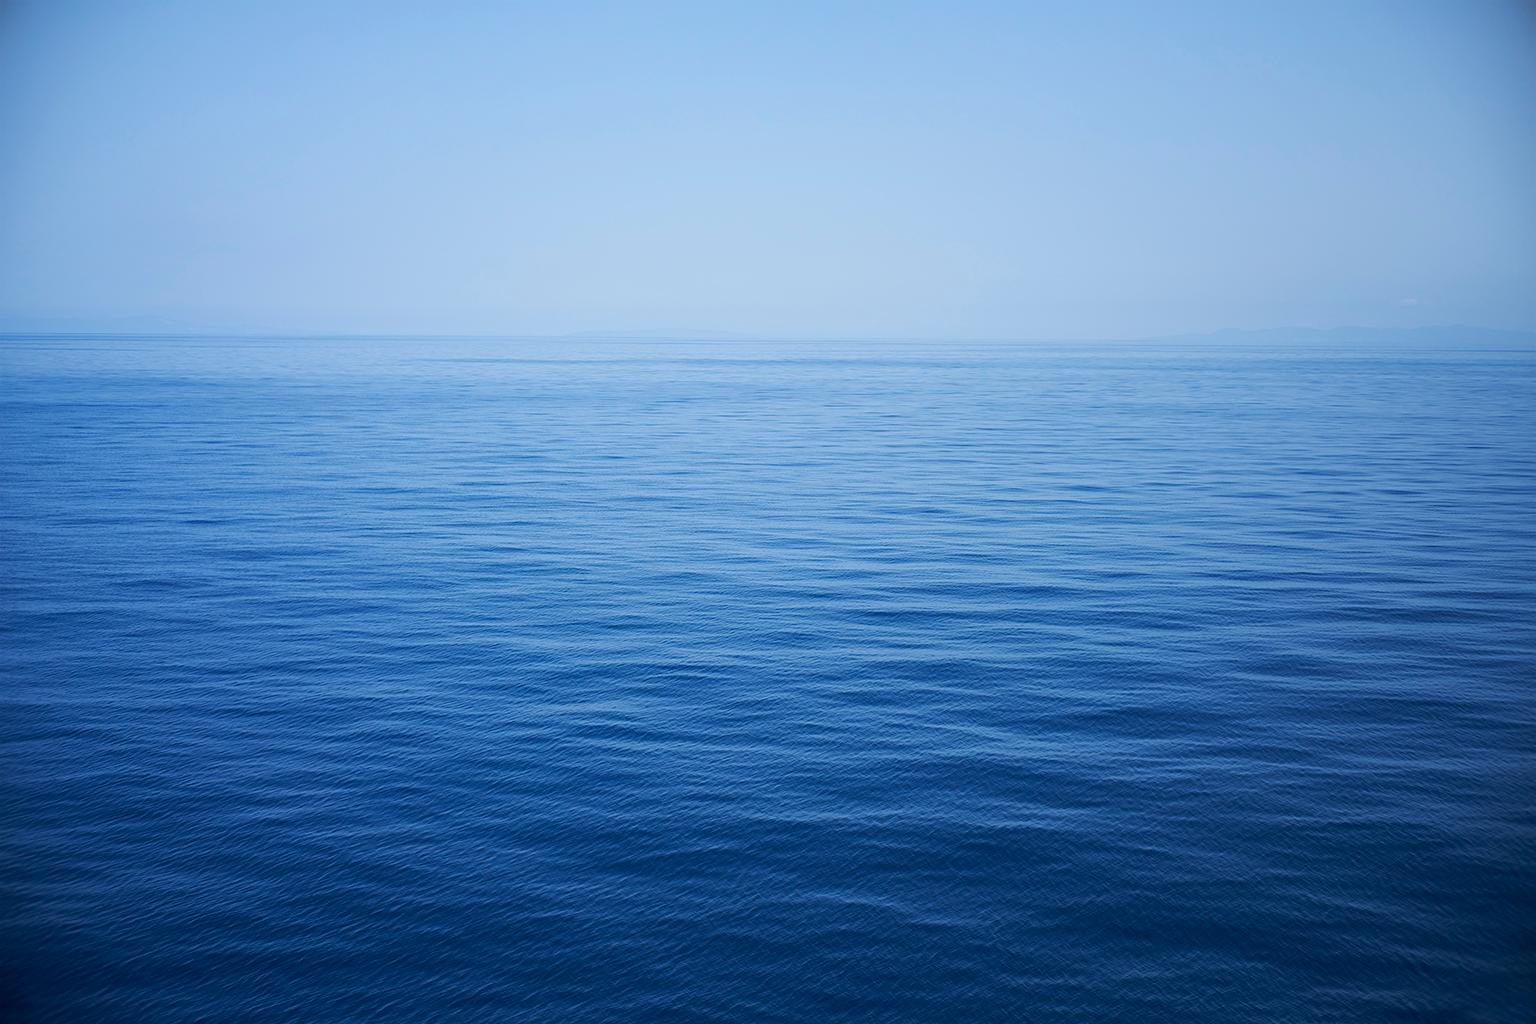 Seascape X - large format photograph of monochrome blu water surface and horizon - Print by Frank Schott